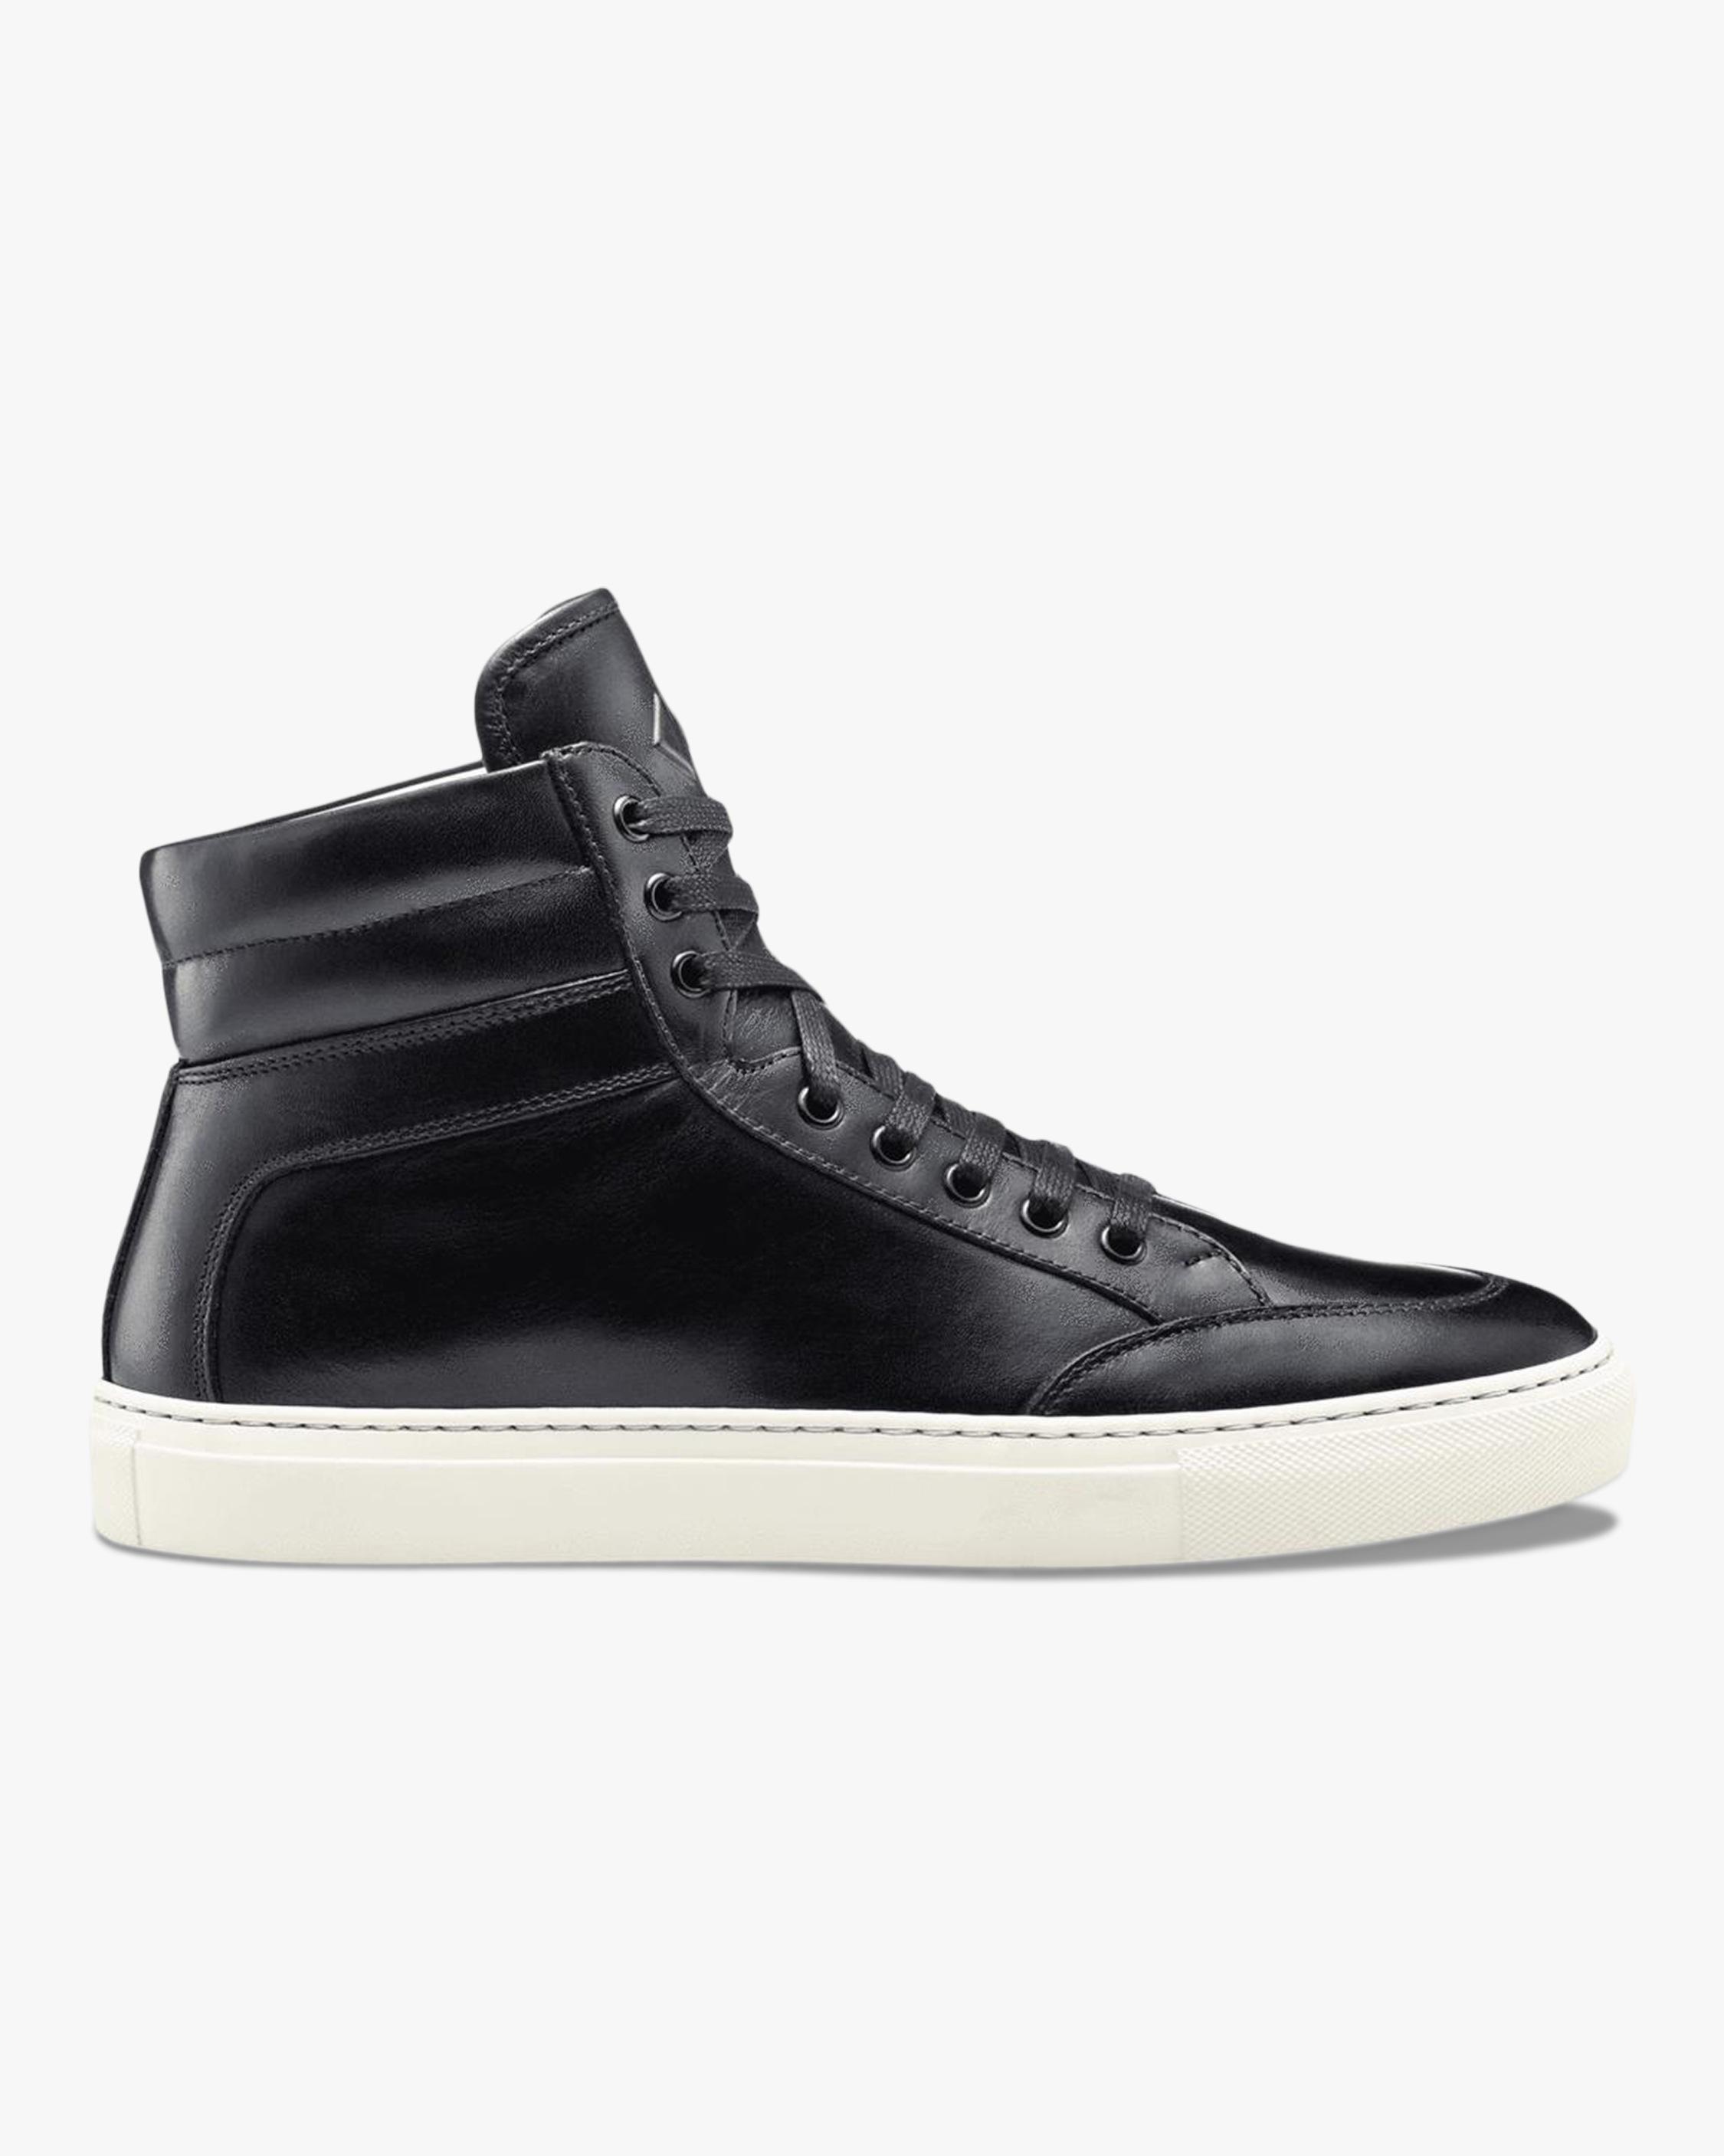 KOIO Leather Men's Primo High-top Sneaker - Lyst